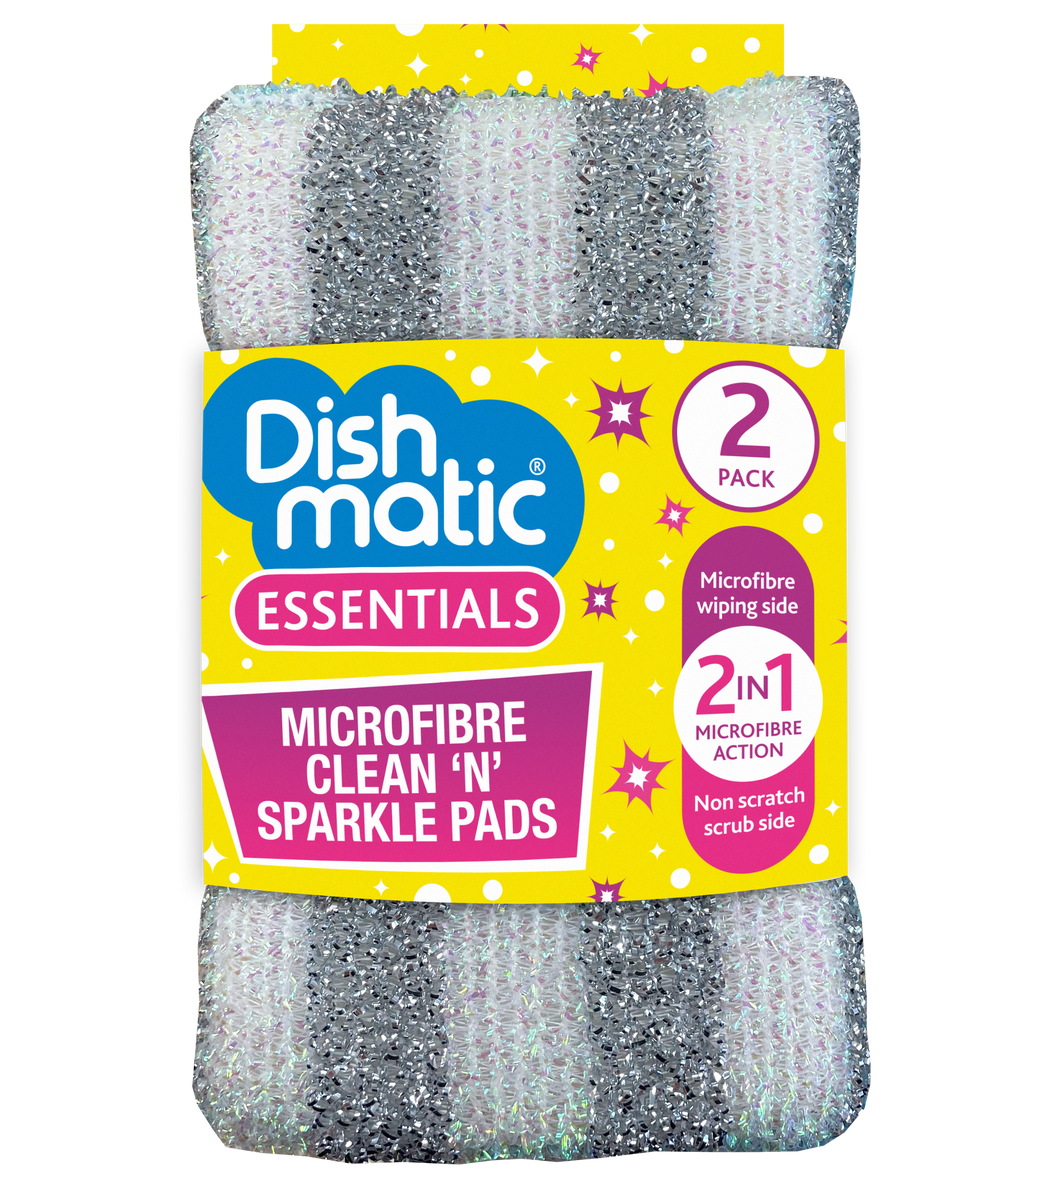 Dishmatic Essentials Clean 'N' Sparkle Pads 2 Pack